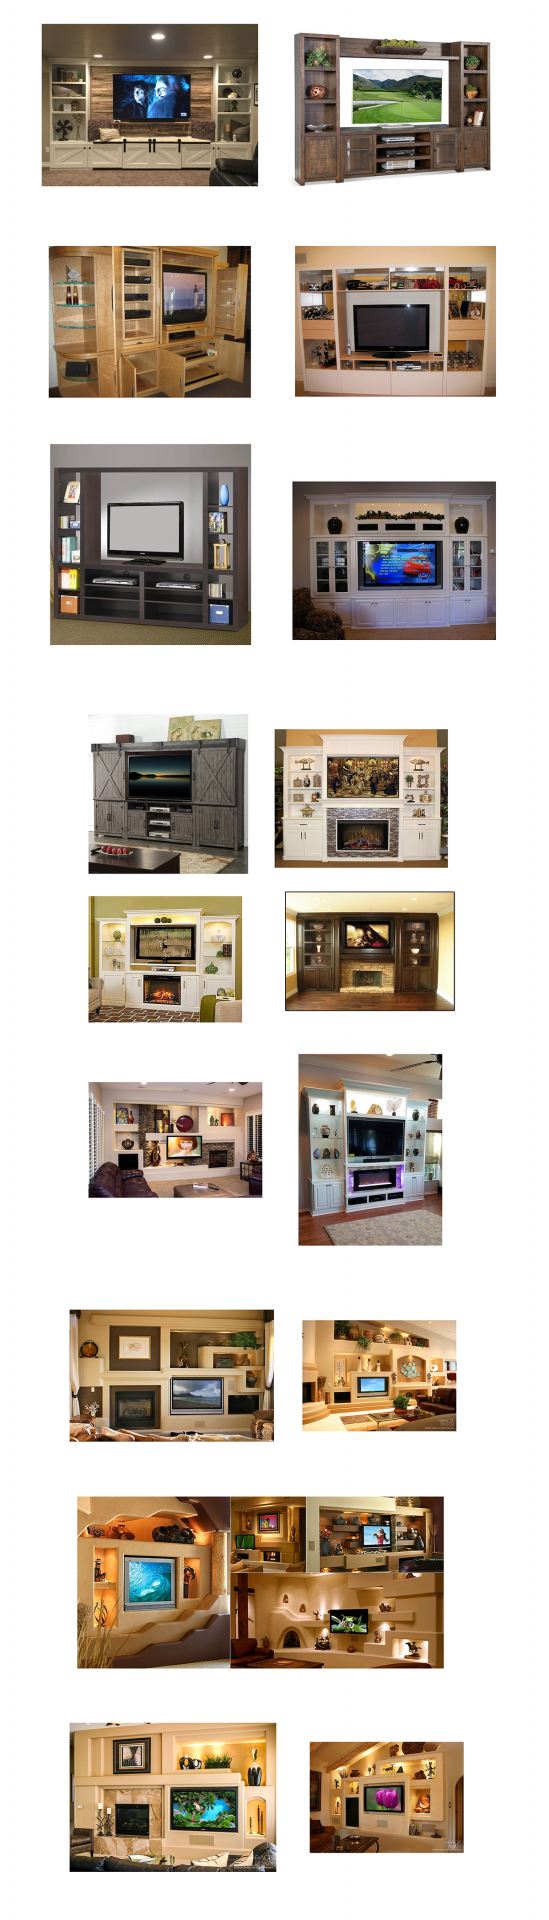 A collection of images of TV Cabinets.